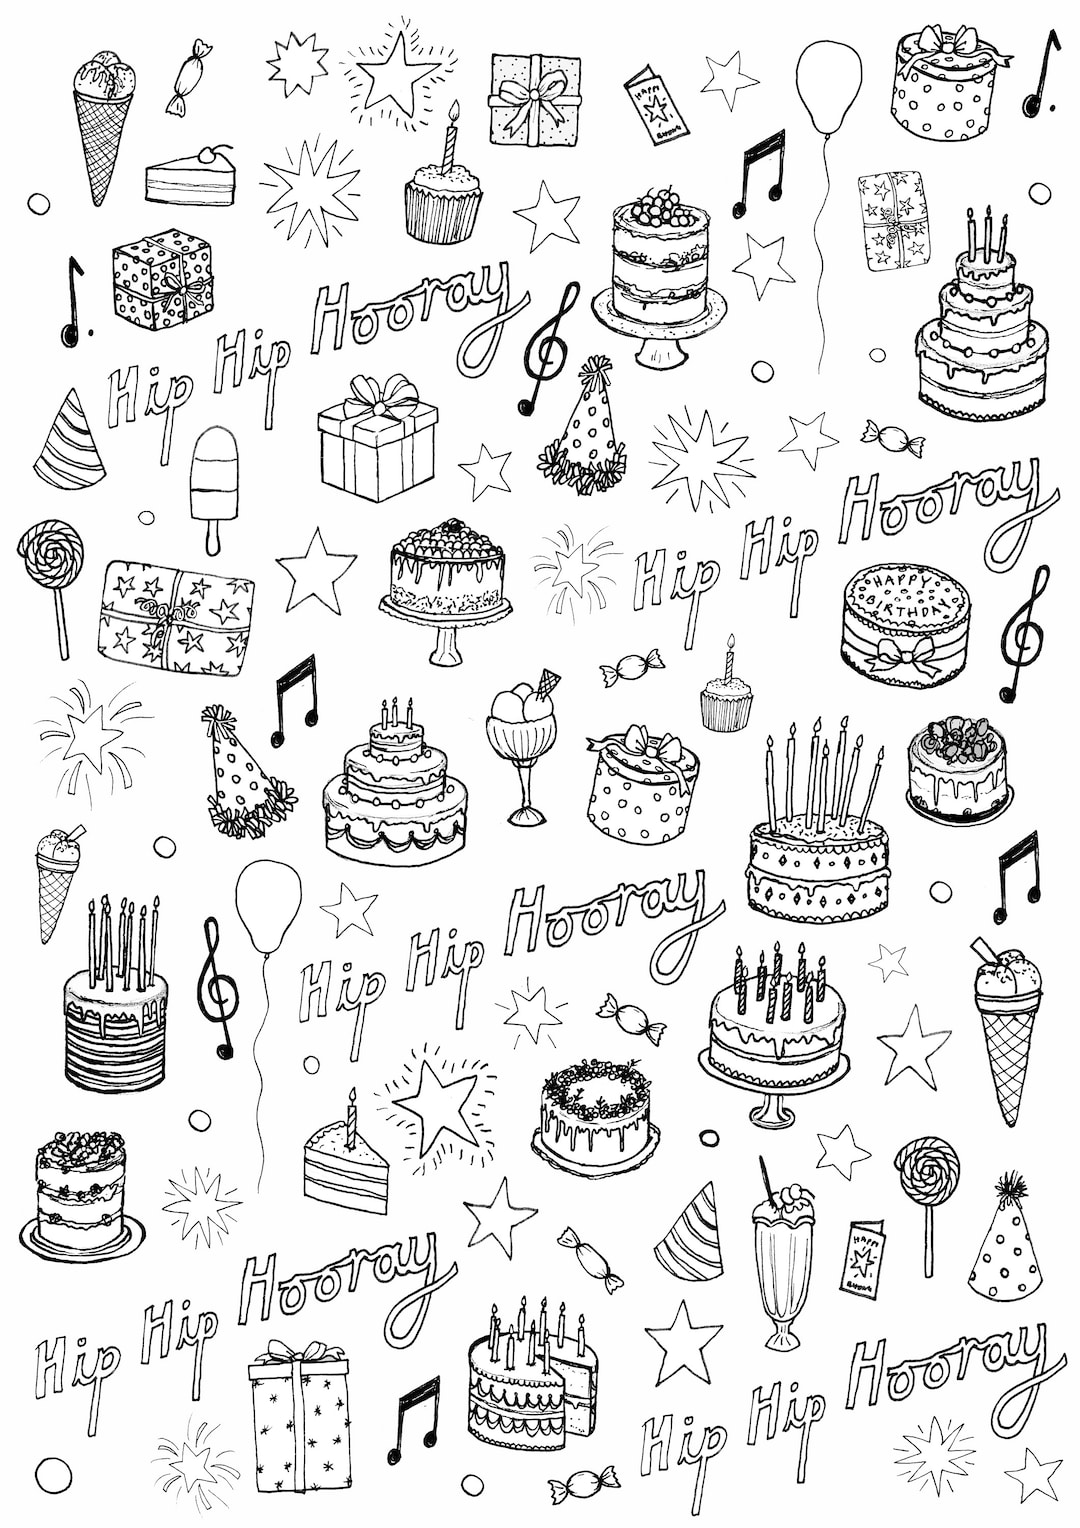 emergency-birthday-wrapping-paper-downloadable-happy-birthday-print-to-gift-wrap-your-presents